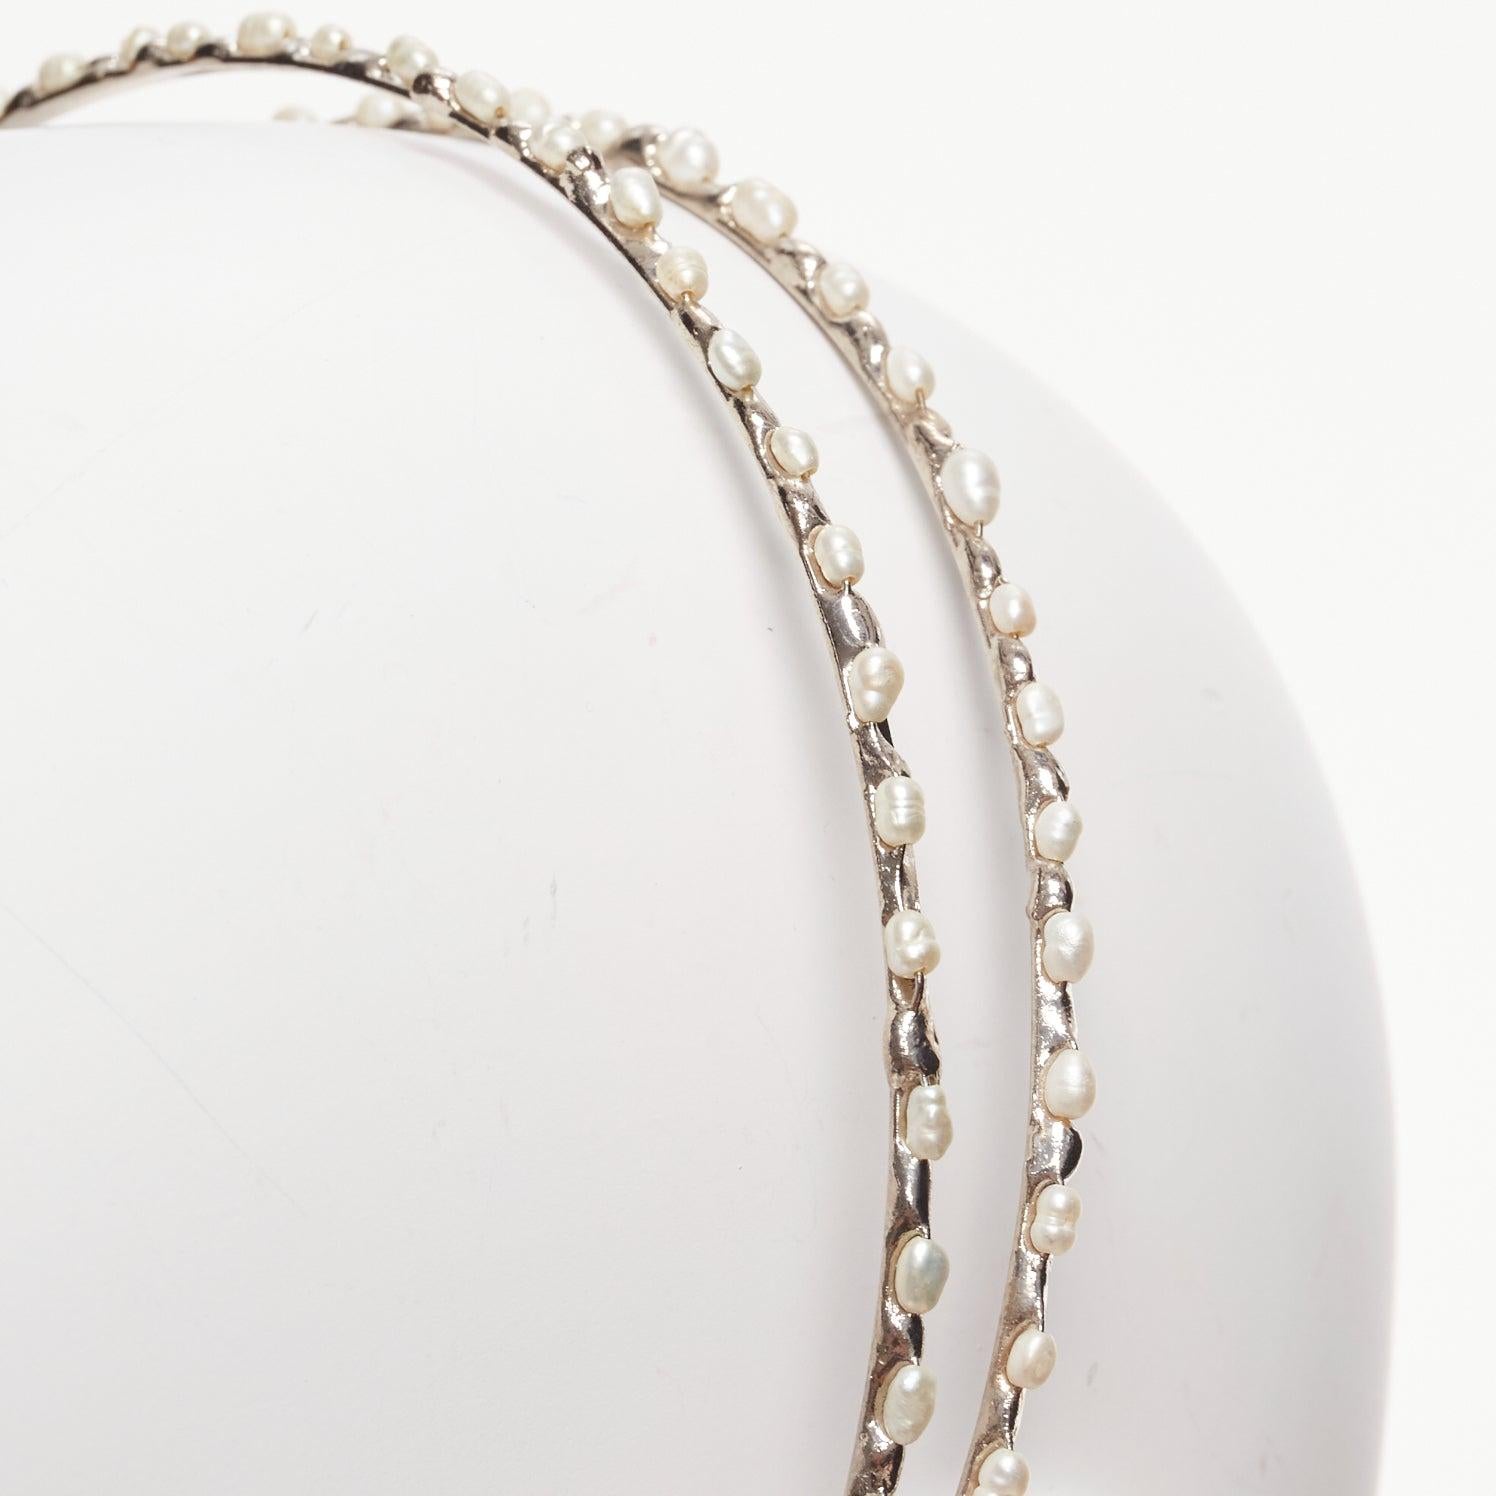 ROSANTICA faux pearl embellished wiggle silver metal alice headband
Reference: AAWC/A01004
Brand: Rosantica
Material: Metal, Faux Pearl
Color: Pearl, Silver
Pattern: Solid
Lining: Silver Metal

CONDITION:
Condition: Unworn with defects. Tags are